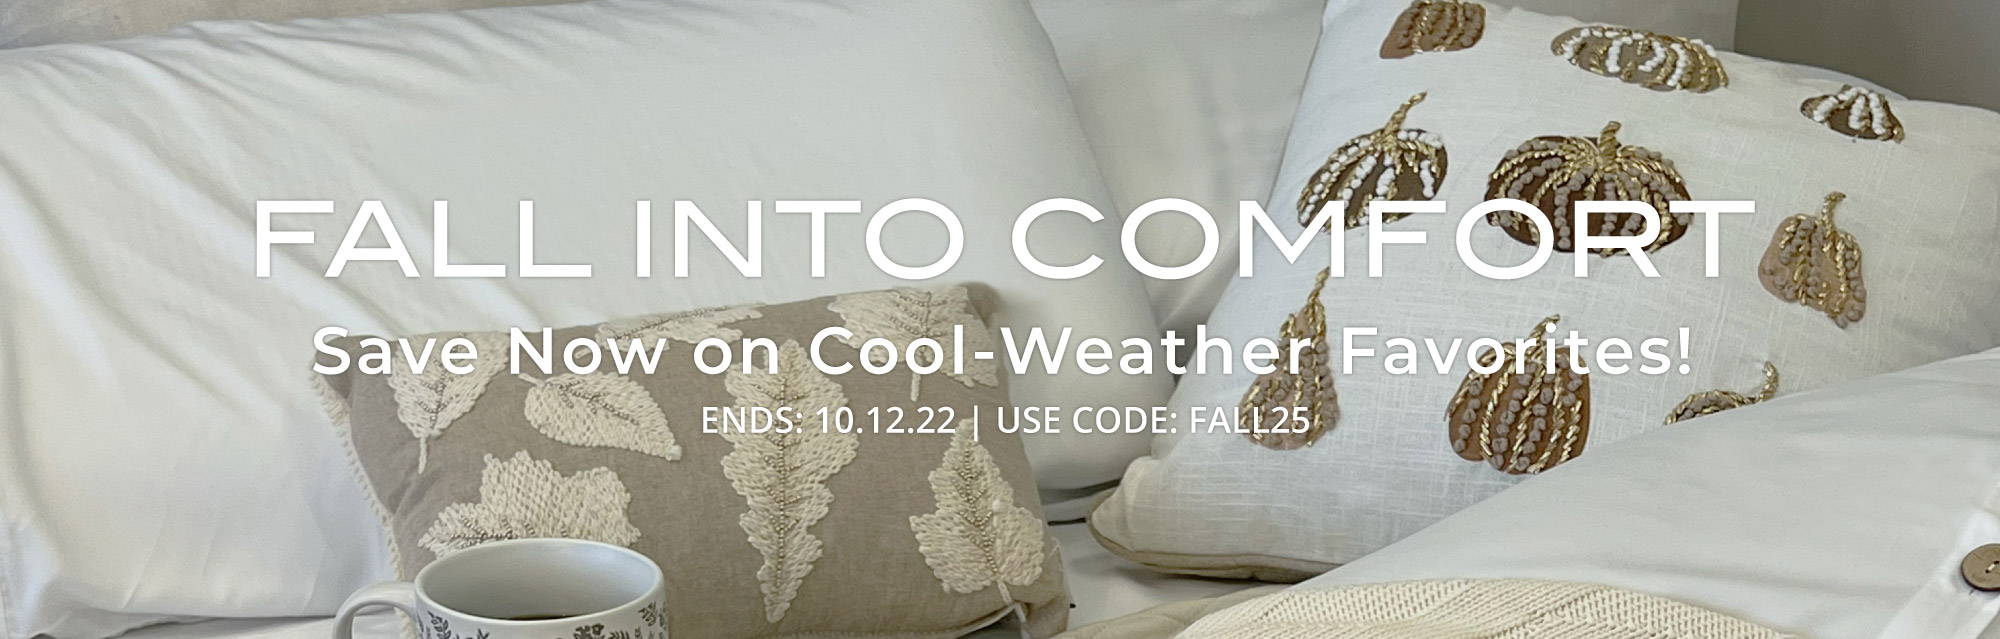 Fall into comfort. Save now on cool-weather favorites! Ends: 10-12-22. Use code: FALL25